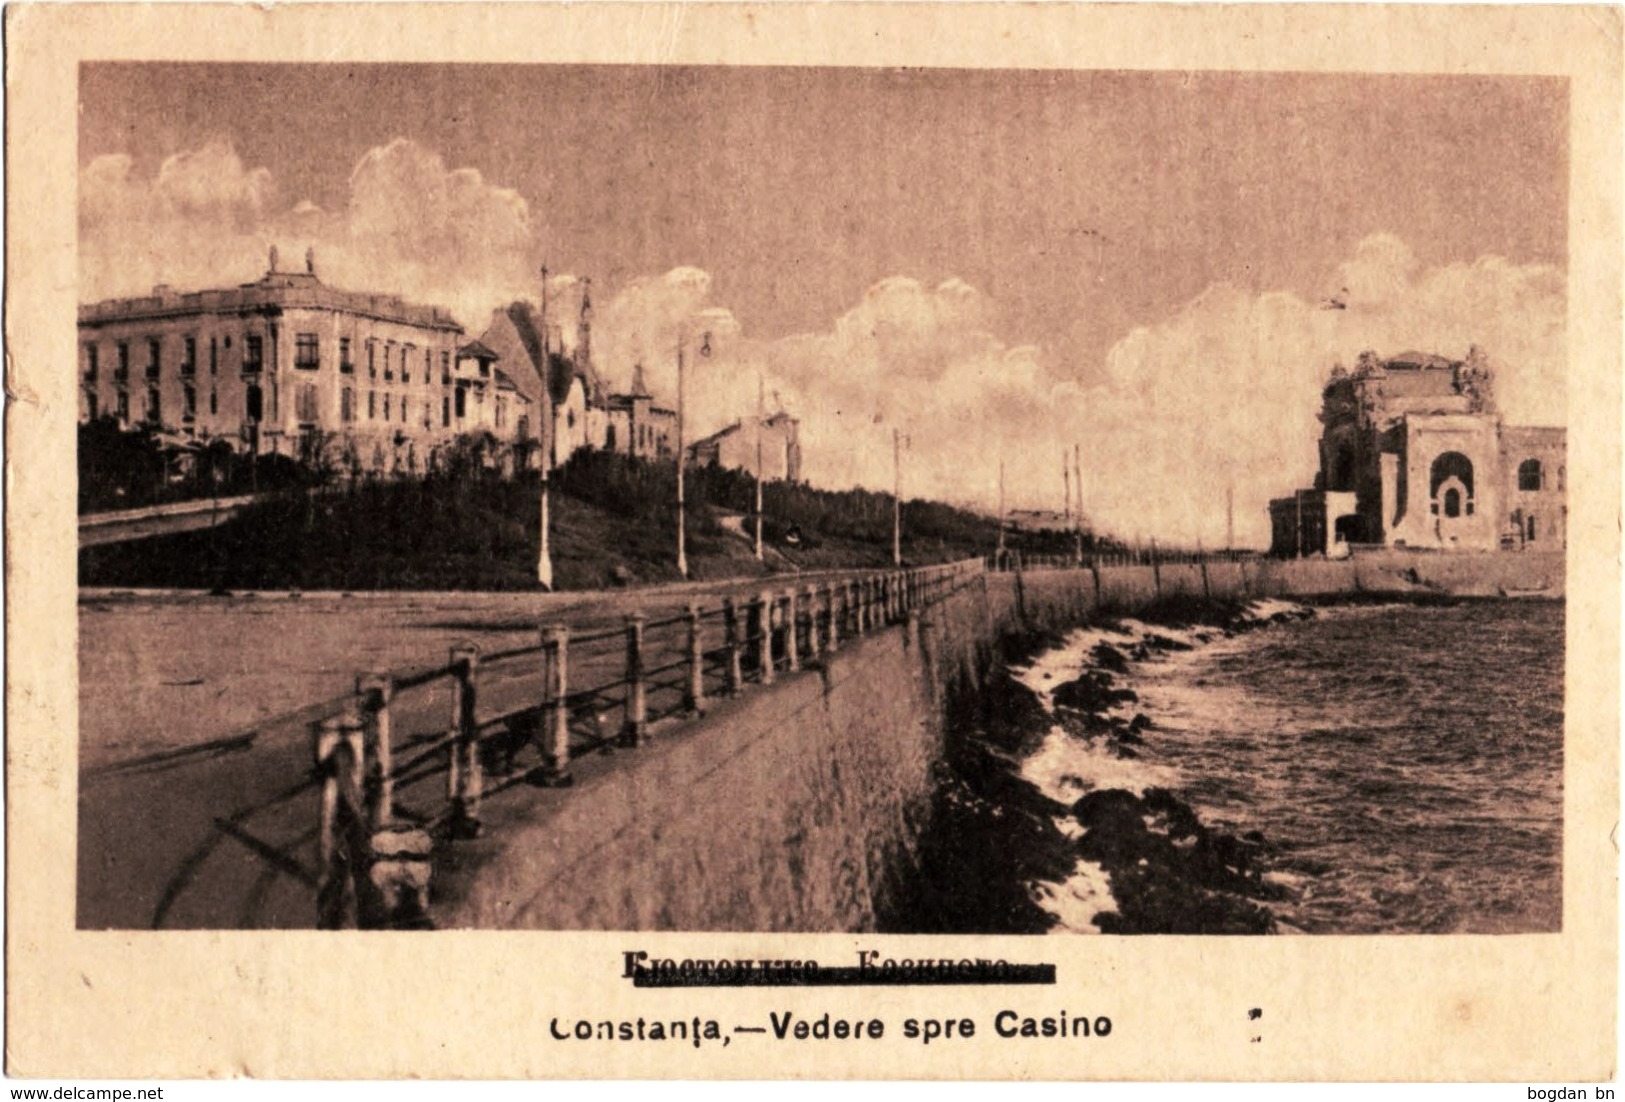 ROMANIA -CONSTANTA -CASINO - 1919 - FRENCH EXPEDITIONARY FORCES IN RUSIA - Roumanie